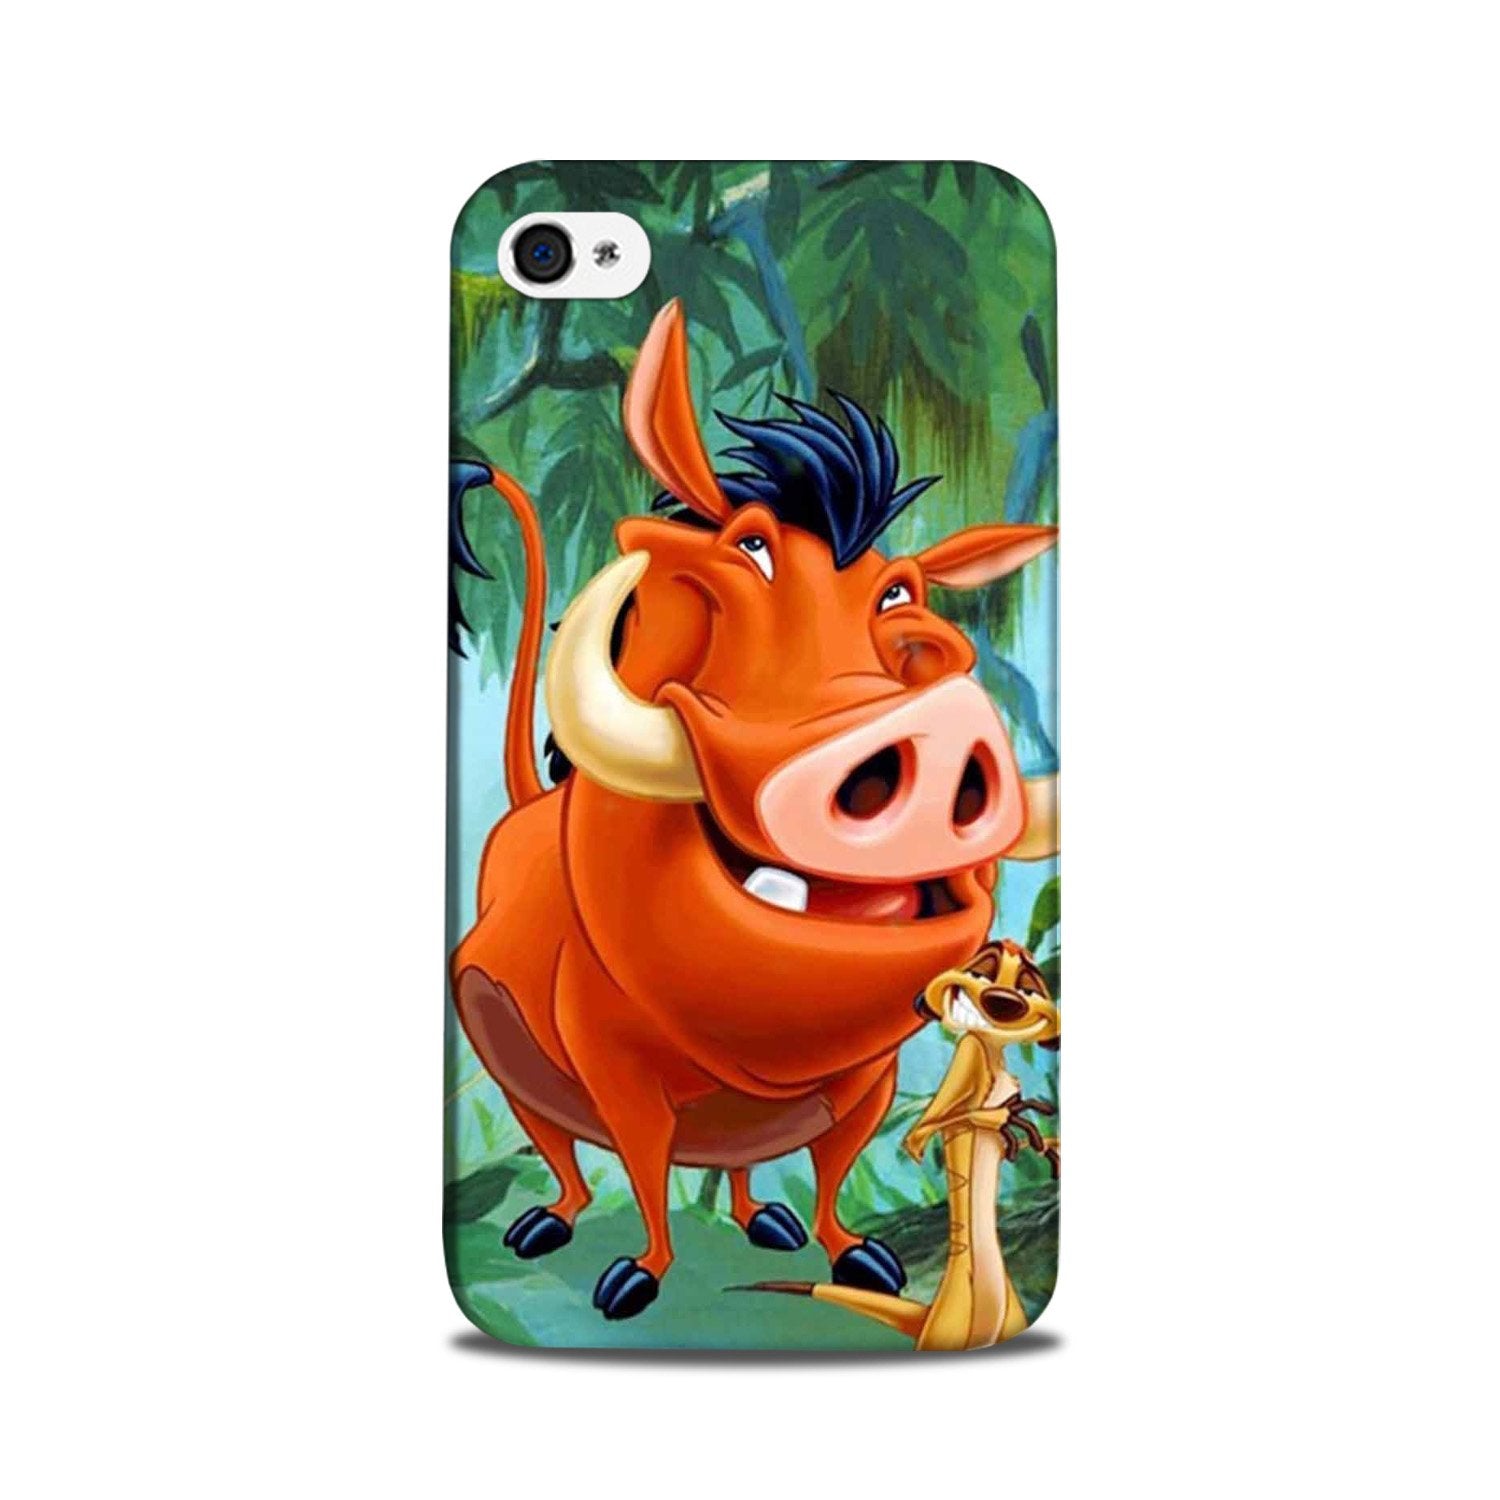 Timon and Pumbaa Mobile Back Case for iPhone 5/ 5s(Design - 305)